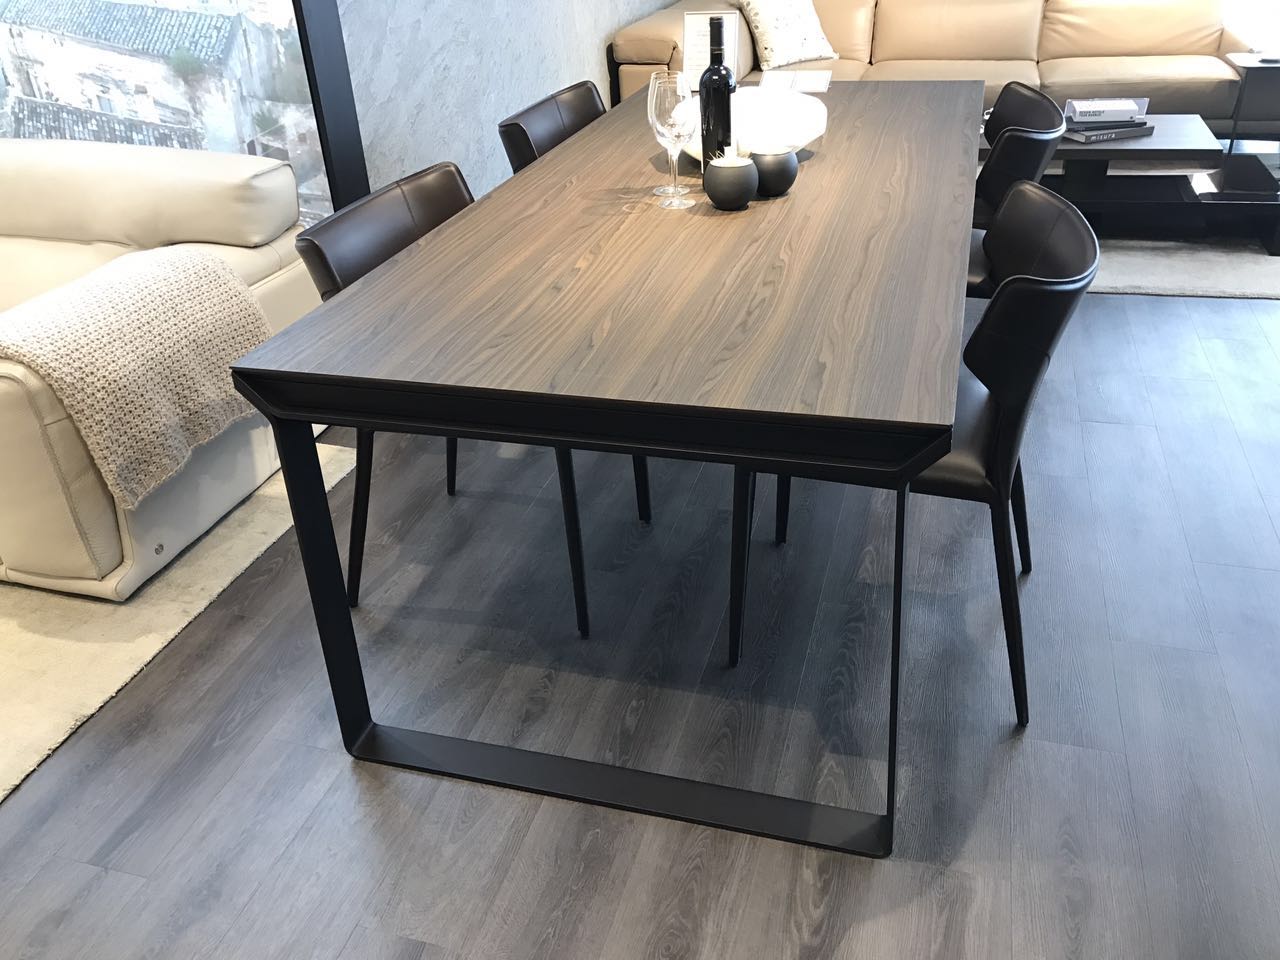 Natuzzi same item furniture dining table nature marble tabletop dining table hardware leg dining table OEM factory